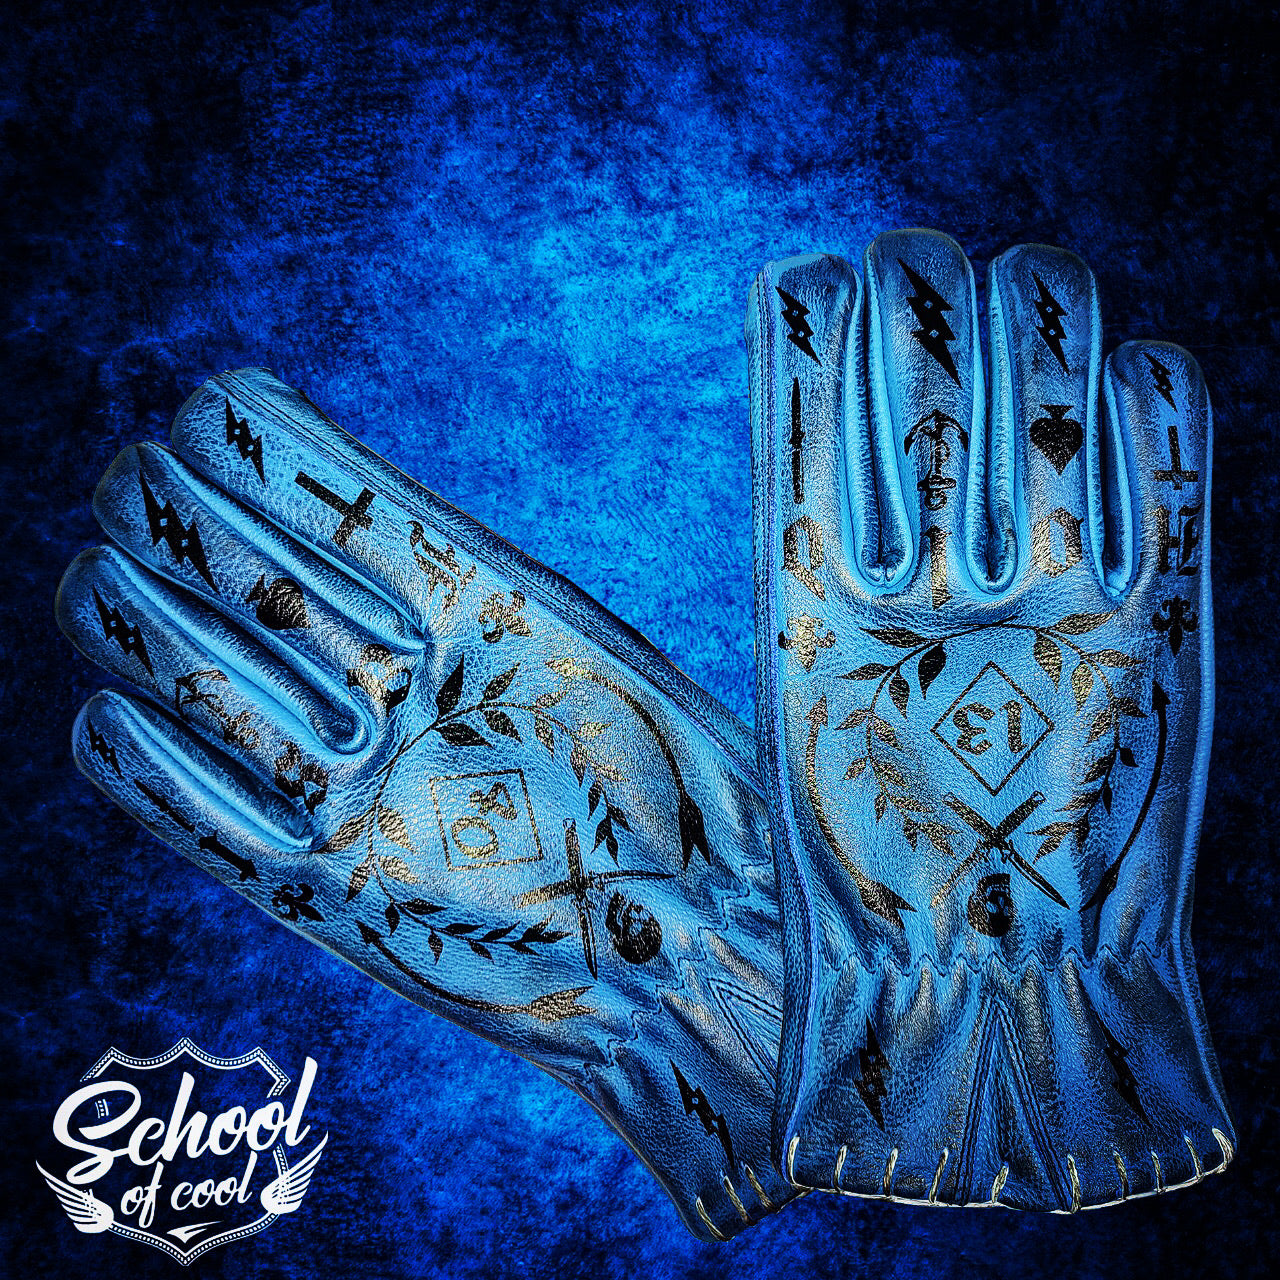 1340 TATTOO GLOVES - by HOLDFAST - BLUE